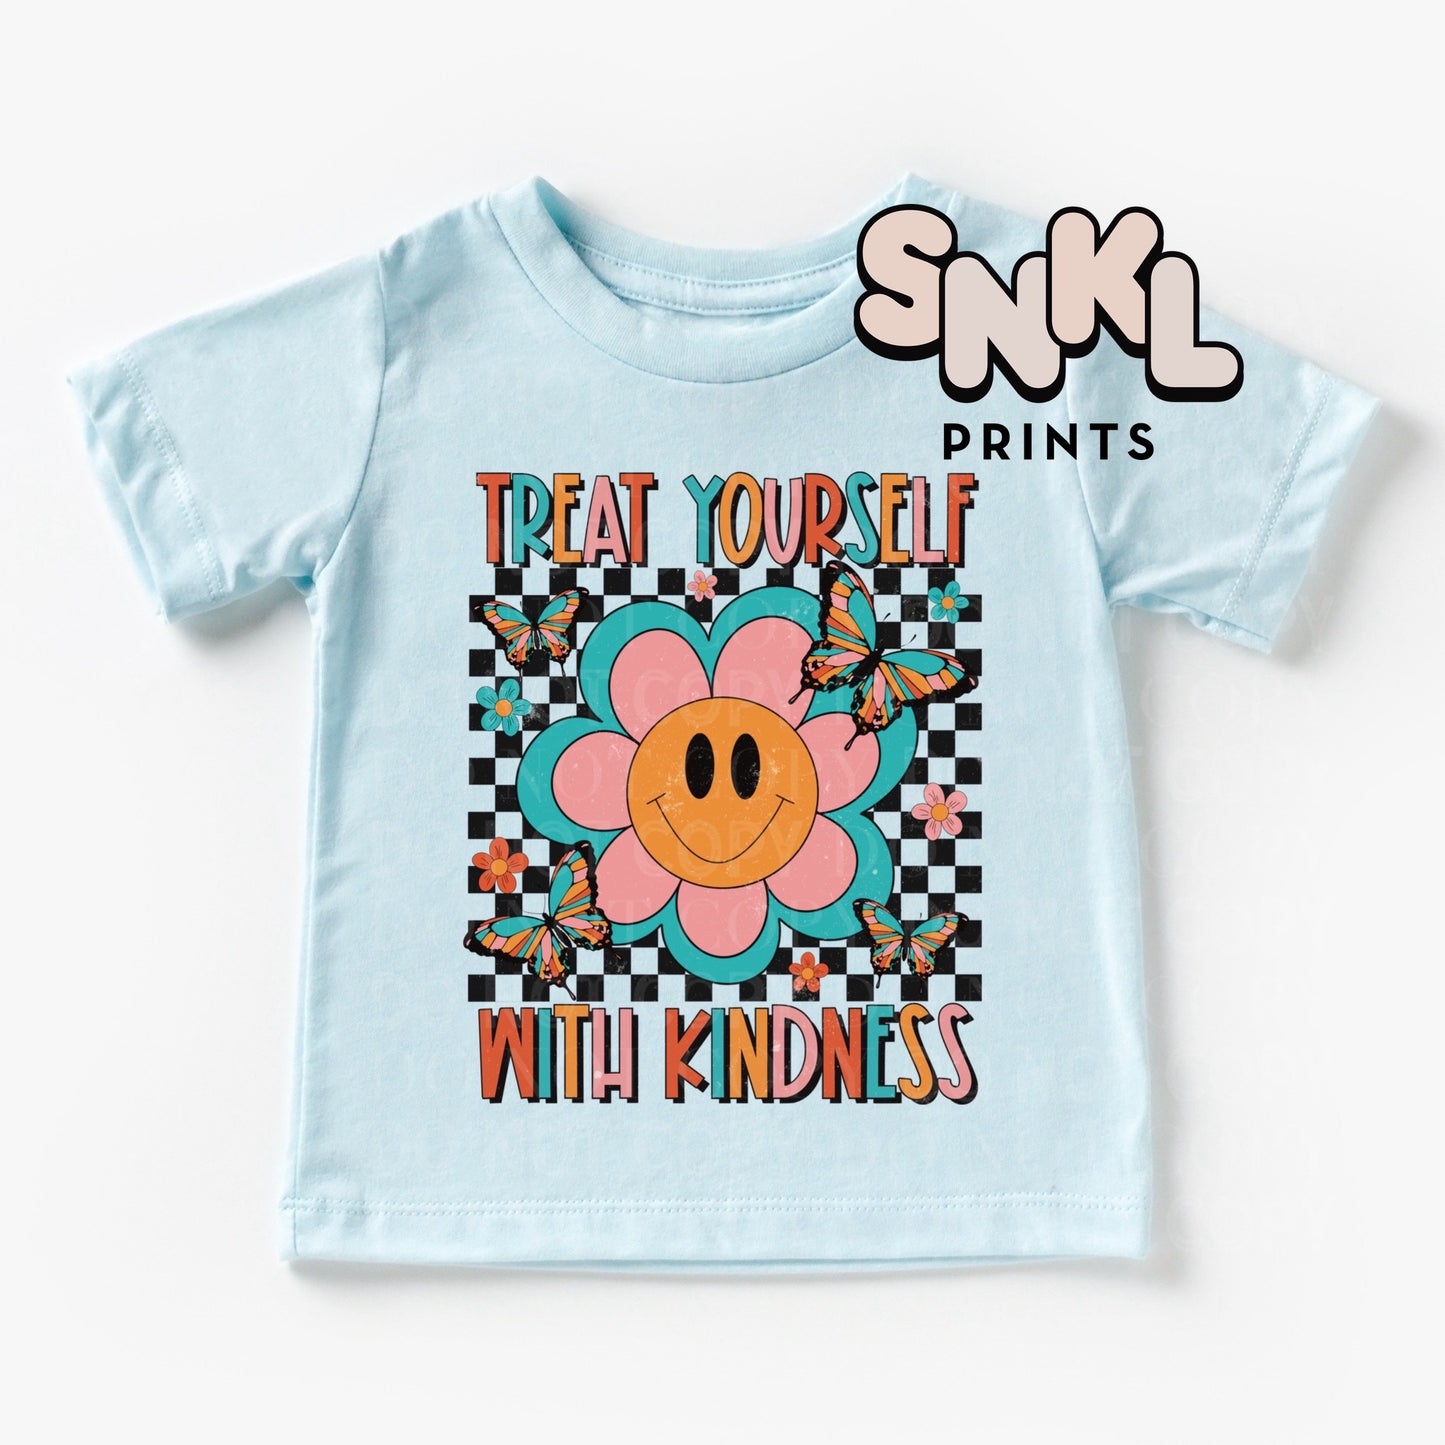 Treat Yourself with Kindness| Kids - SNKL Prints